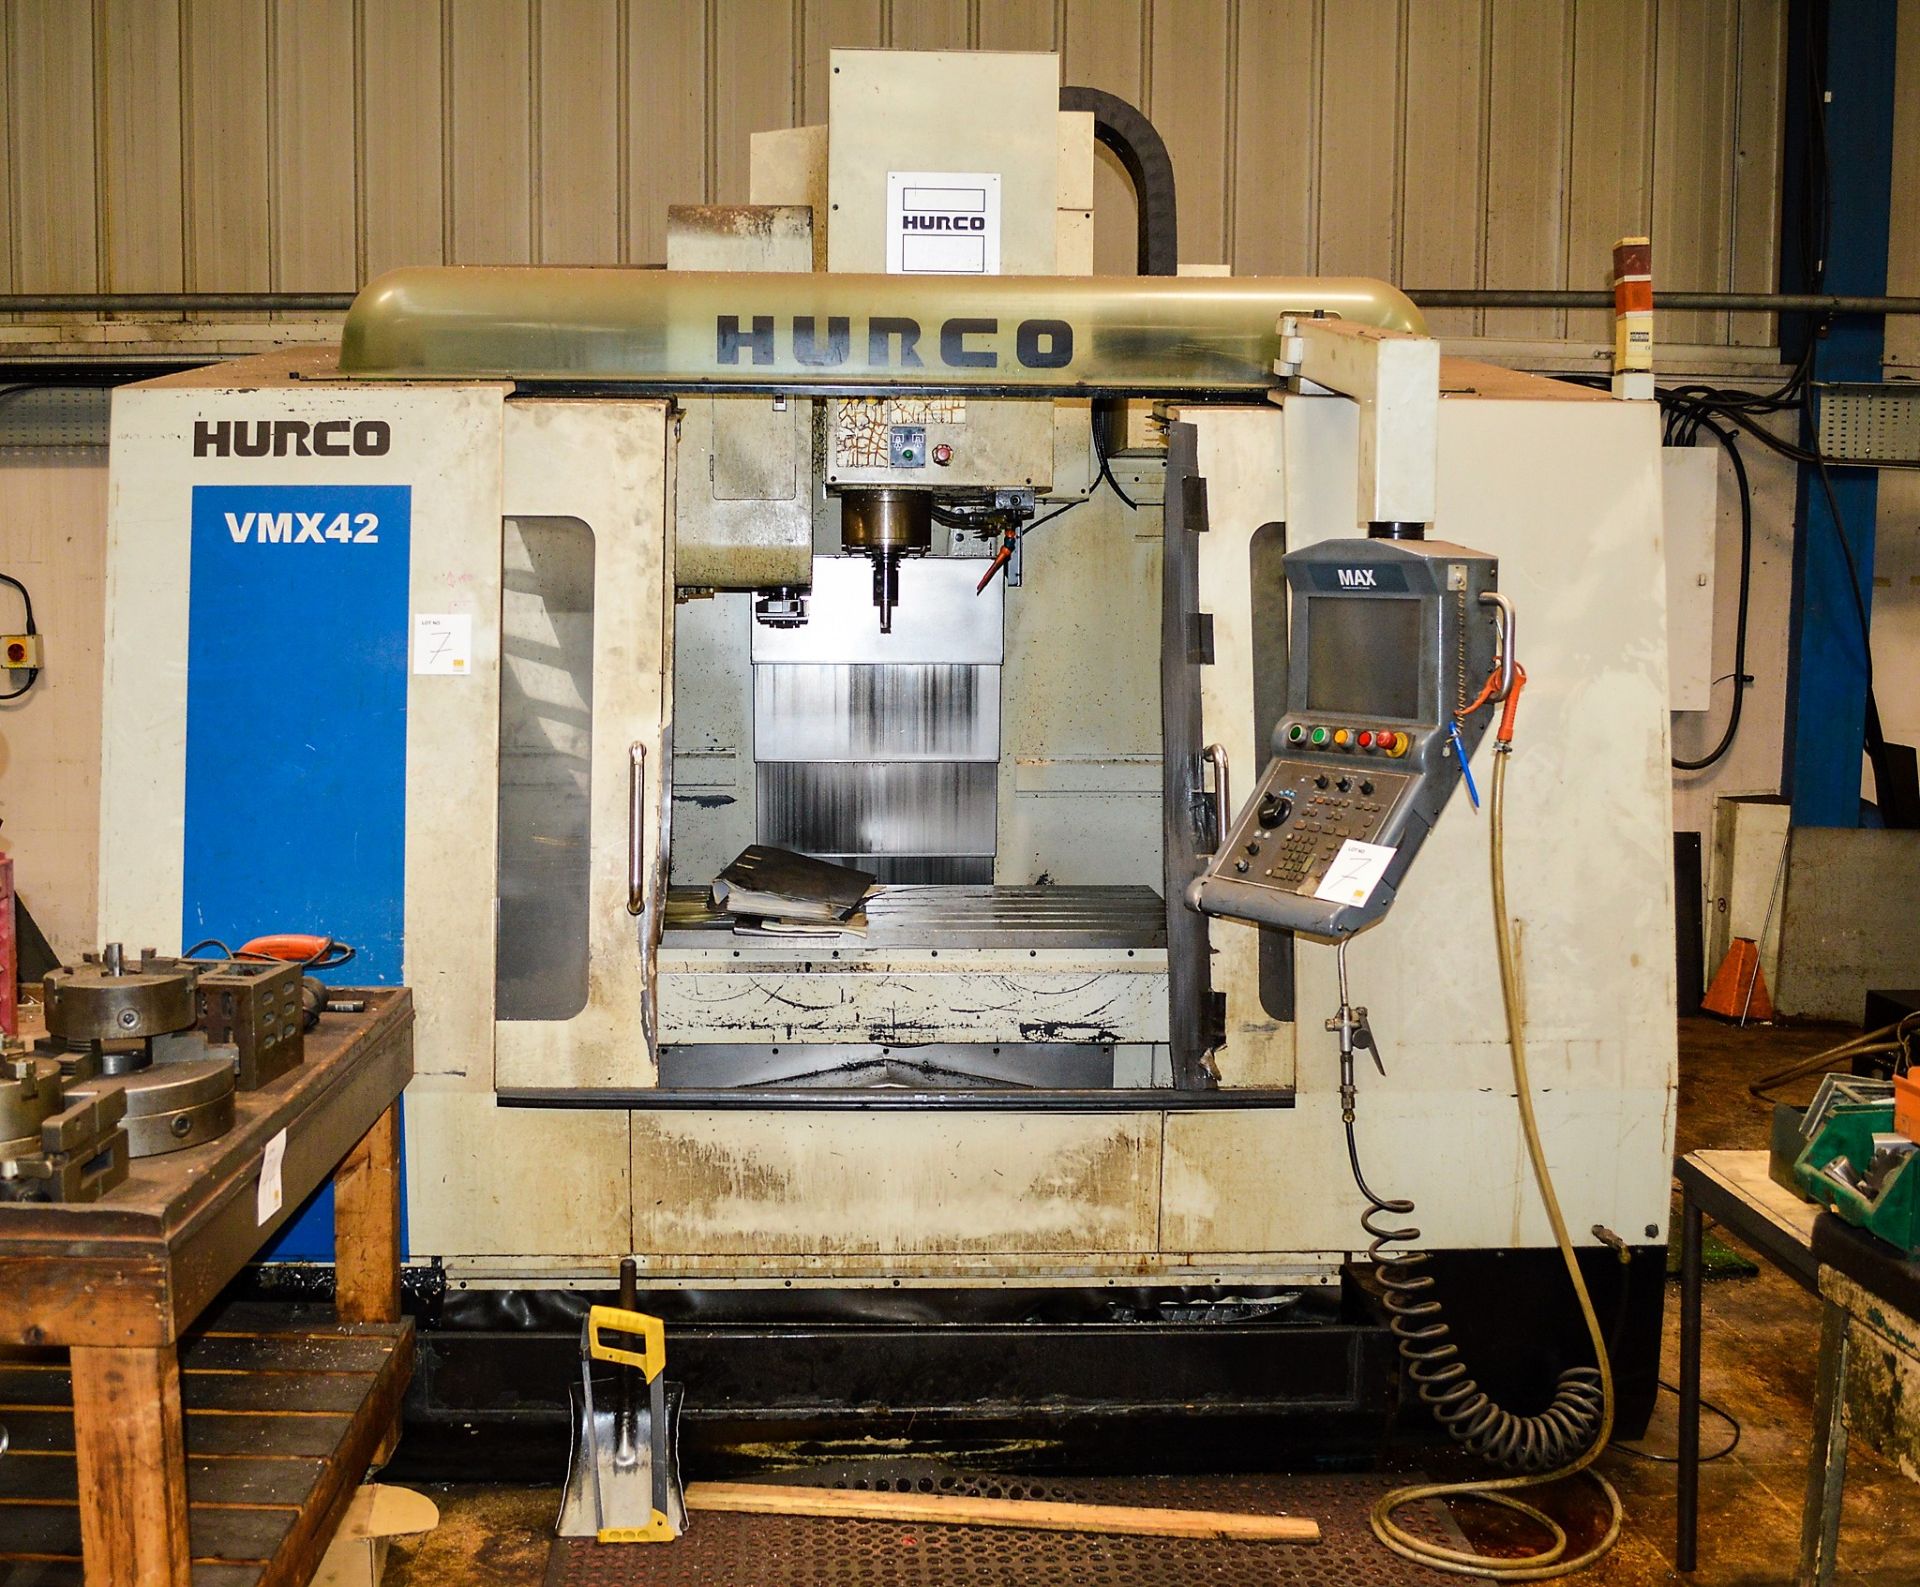 Hurco VMX 42 CNC vertical machine centre Year: 2006 S/N: S40012 c/w 50 inch x 24 inch table, 24